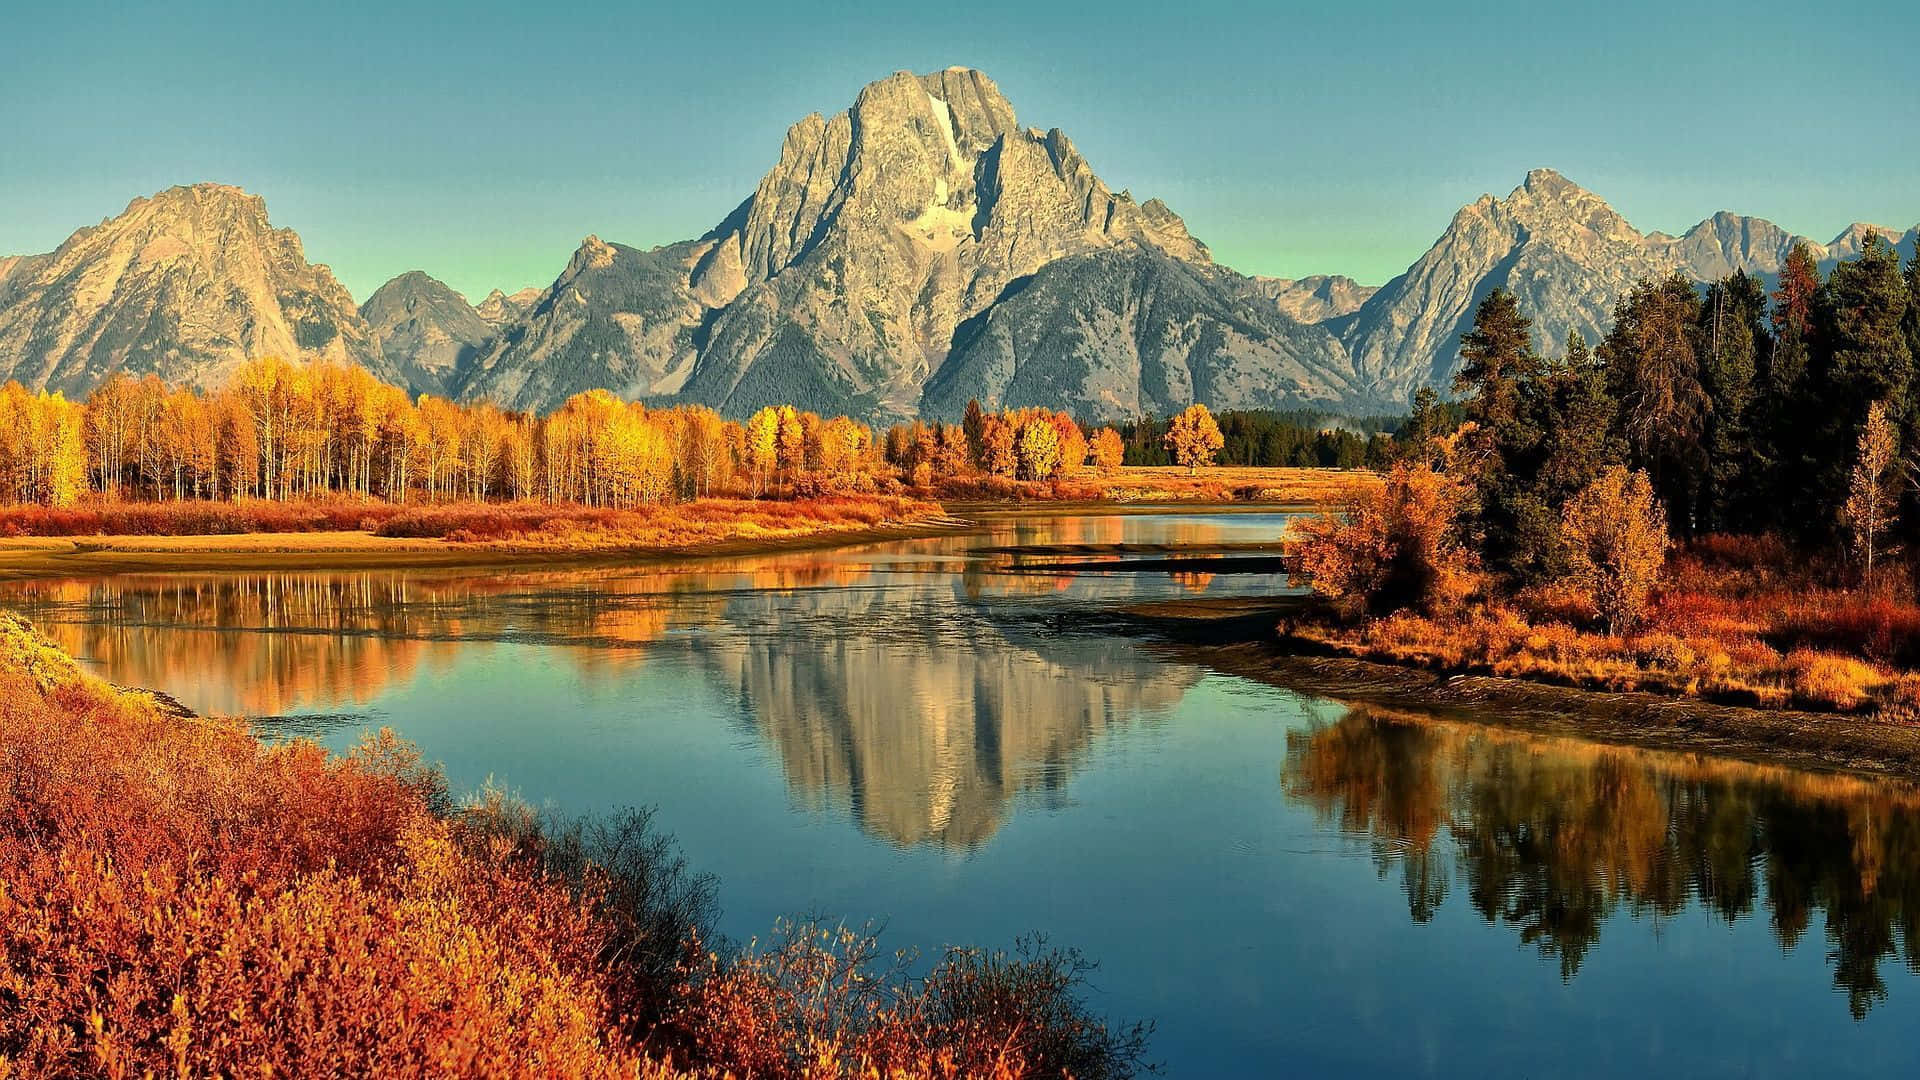 A River Surrounded By Mountains In Autumn Wallpaper